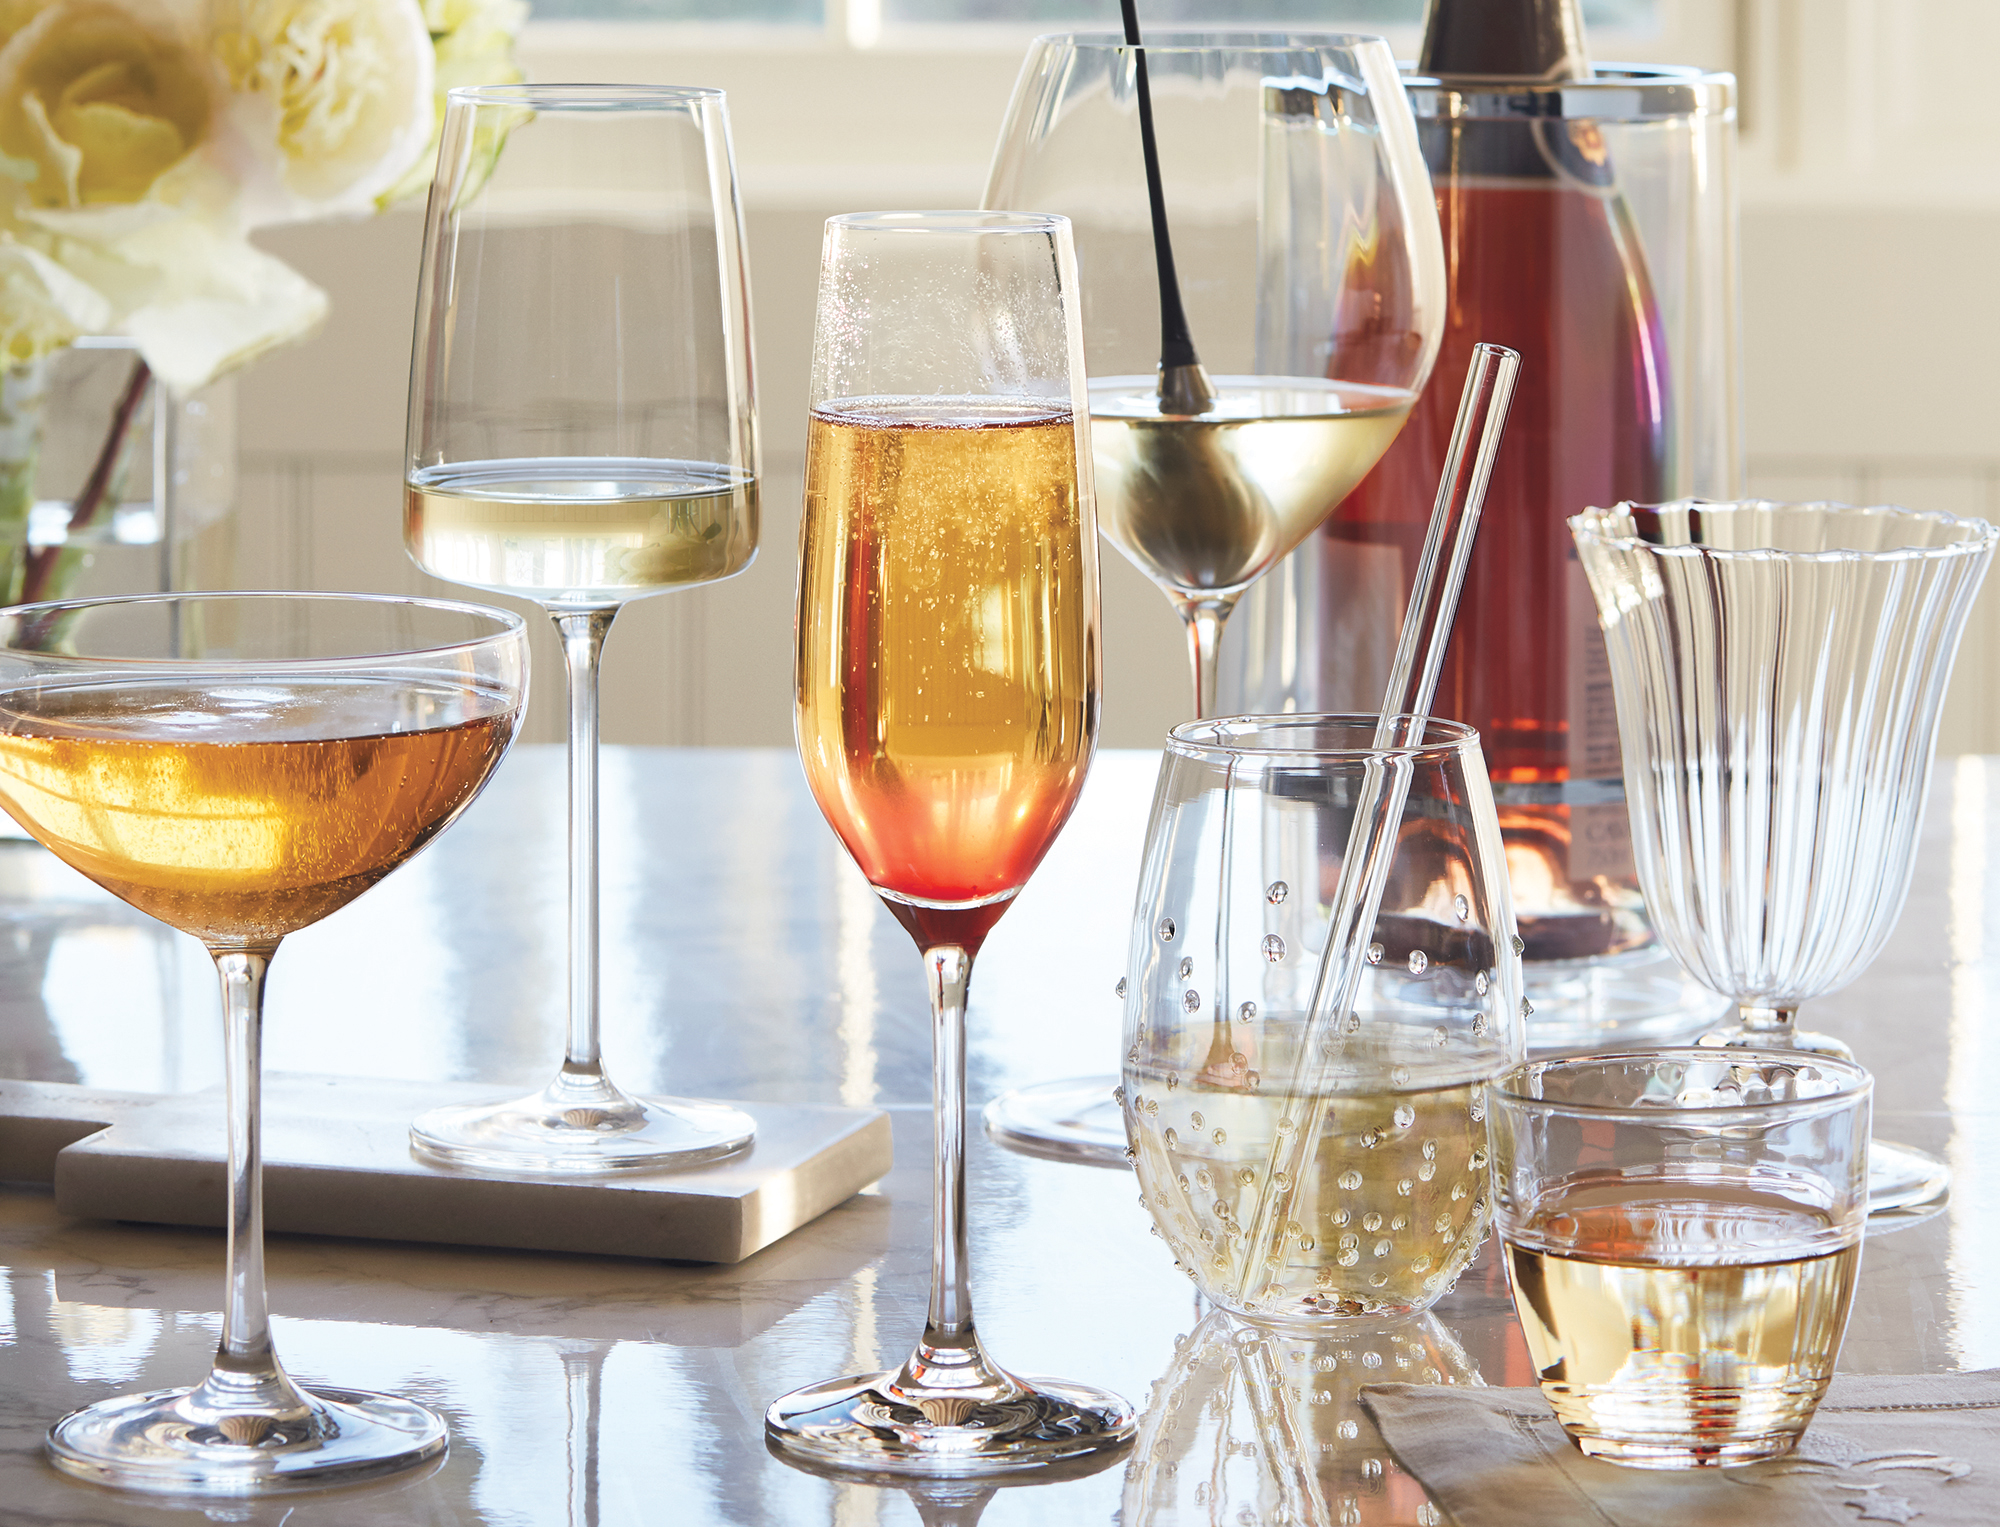 White & Sparkling Wine Glasses from IWA